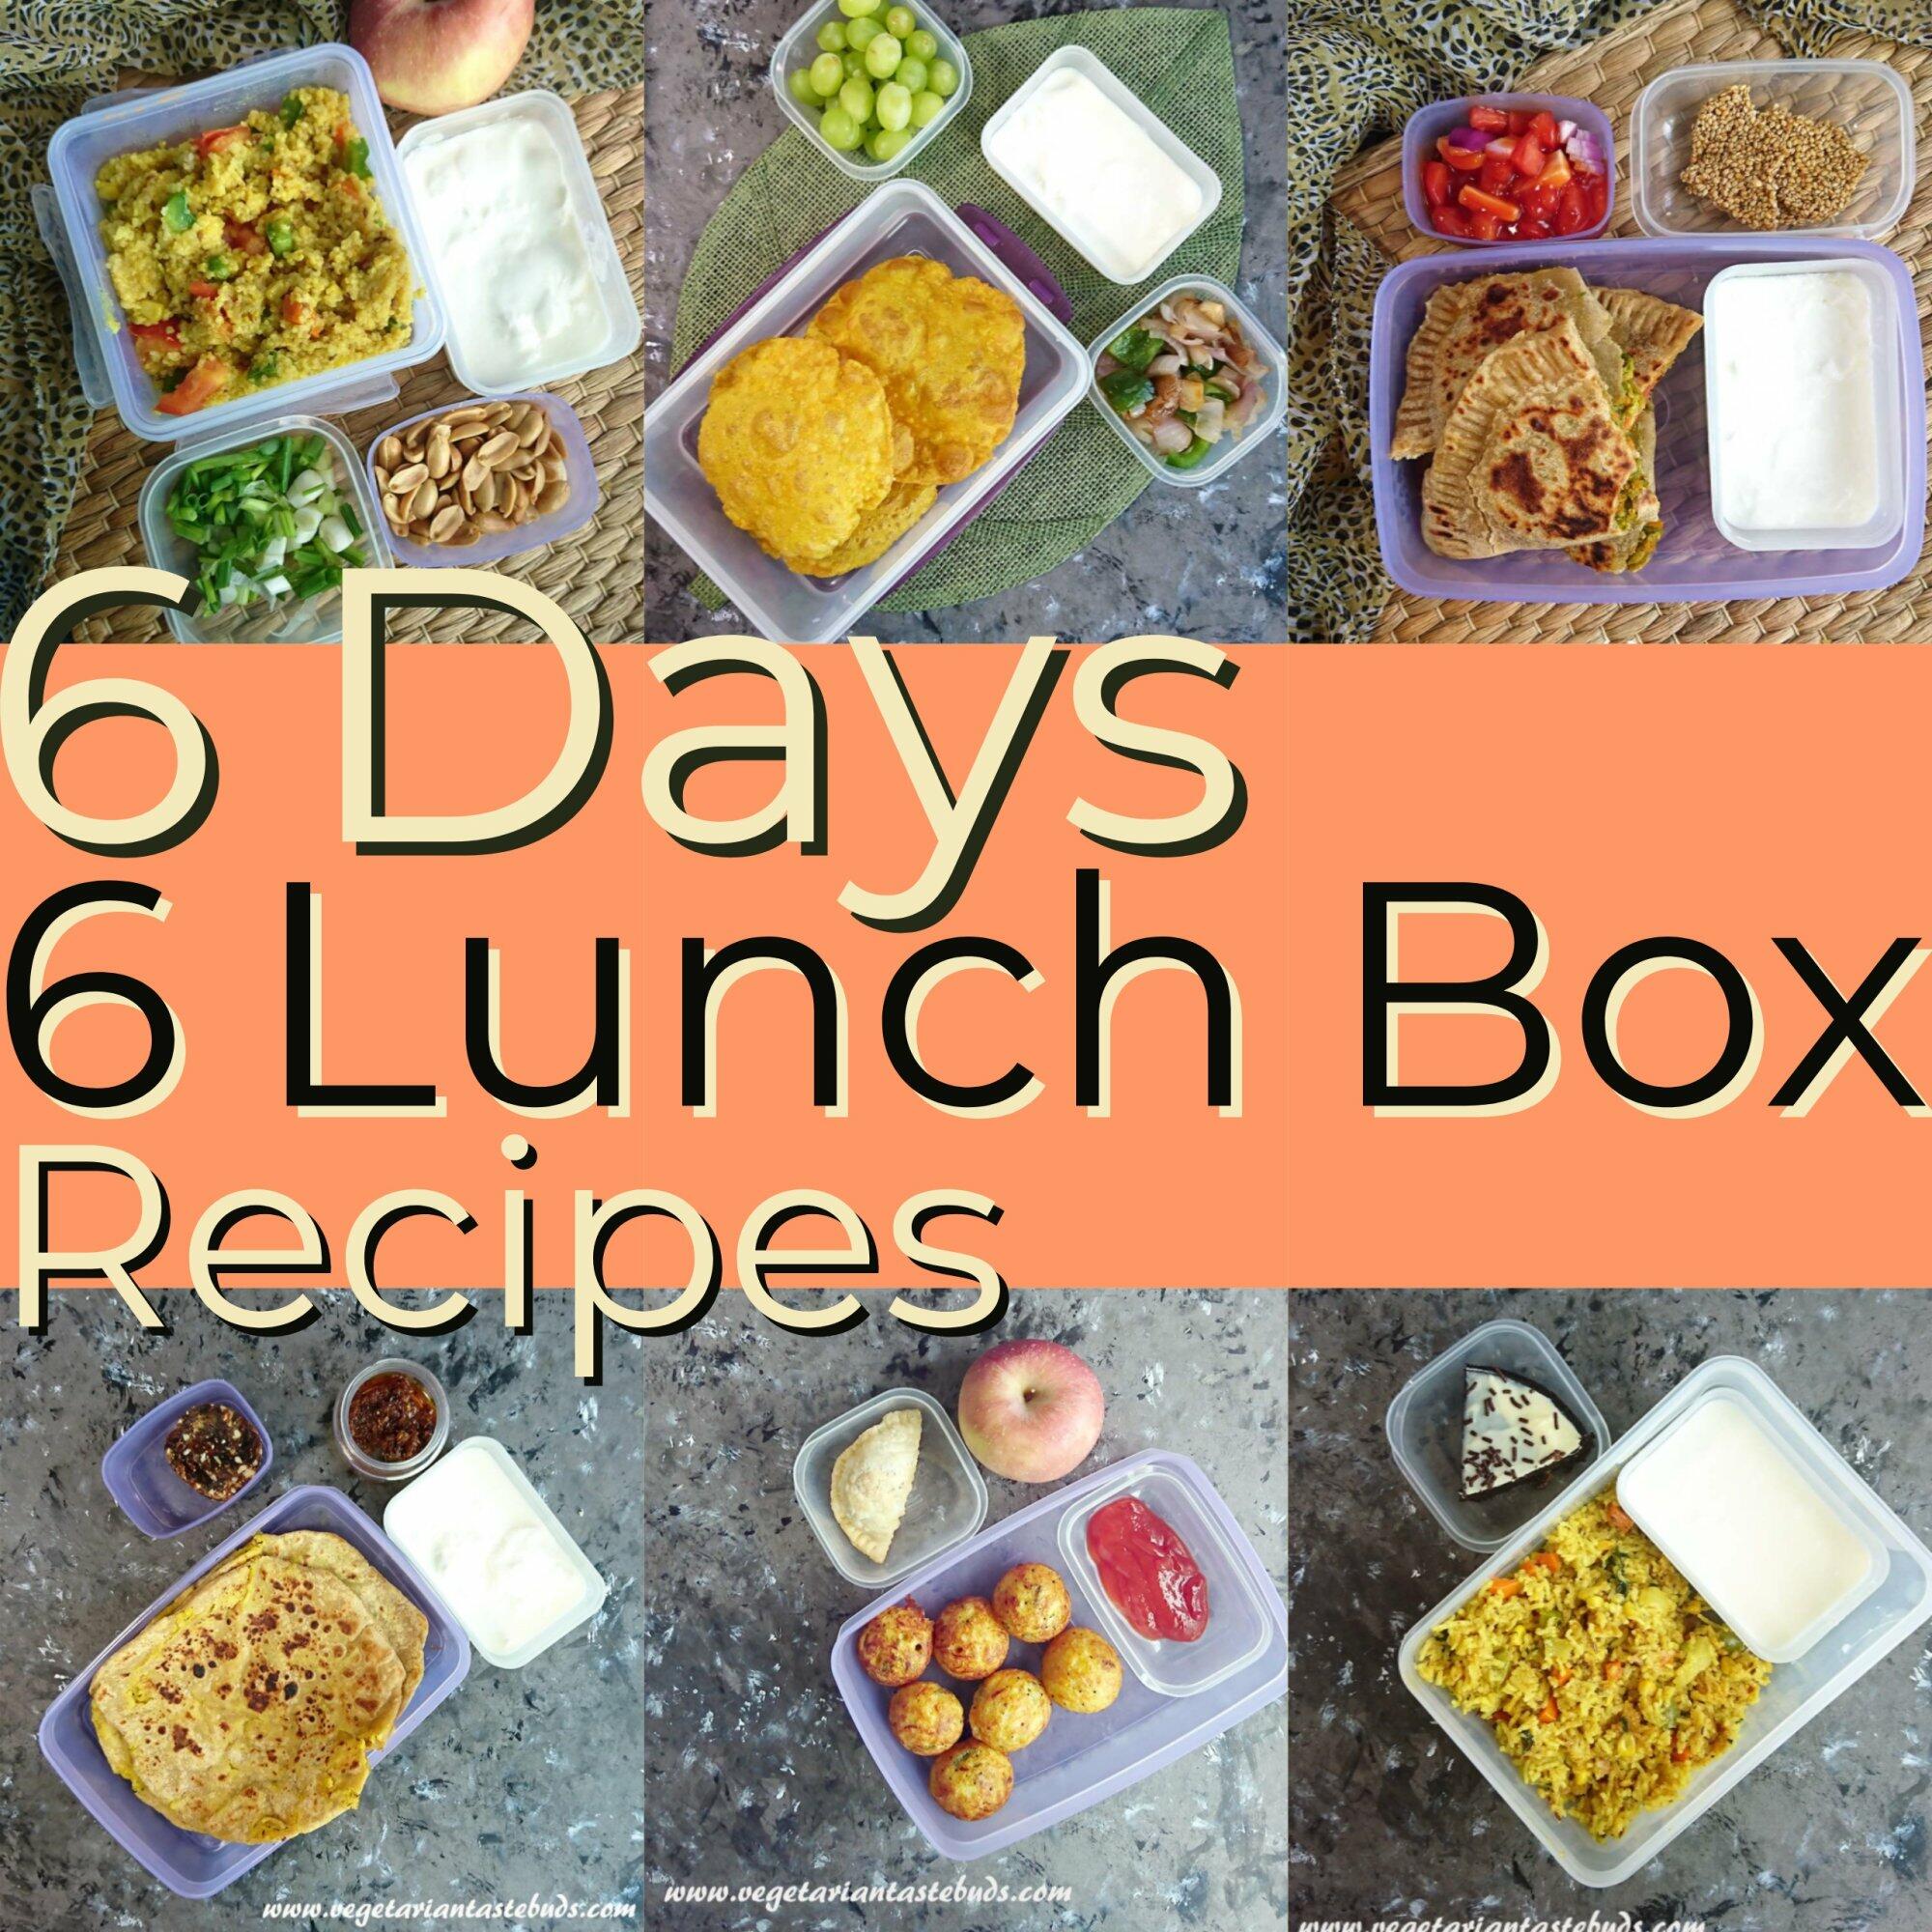 6 Lunch Box Ideas for Kids  6 Healthy Lunch Box Recipes for 6